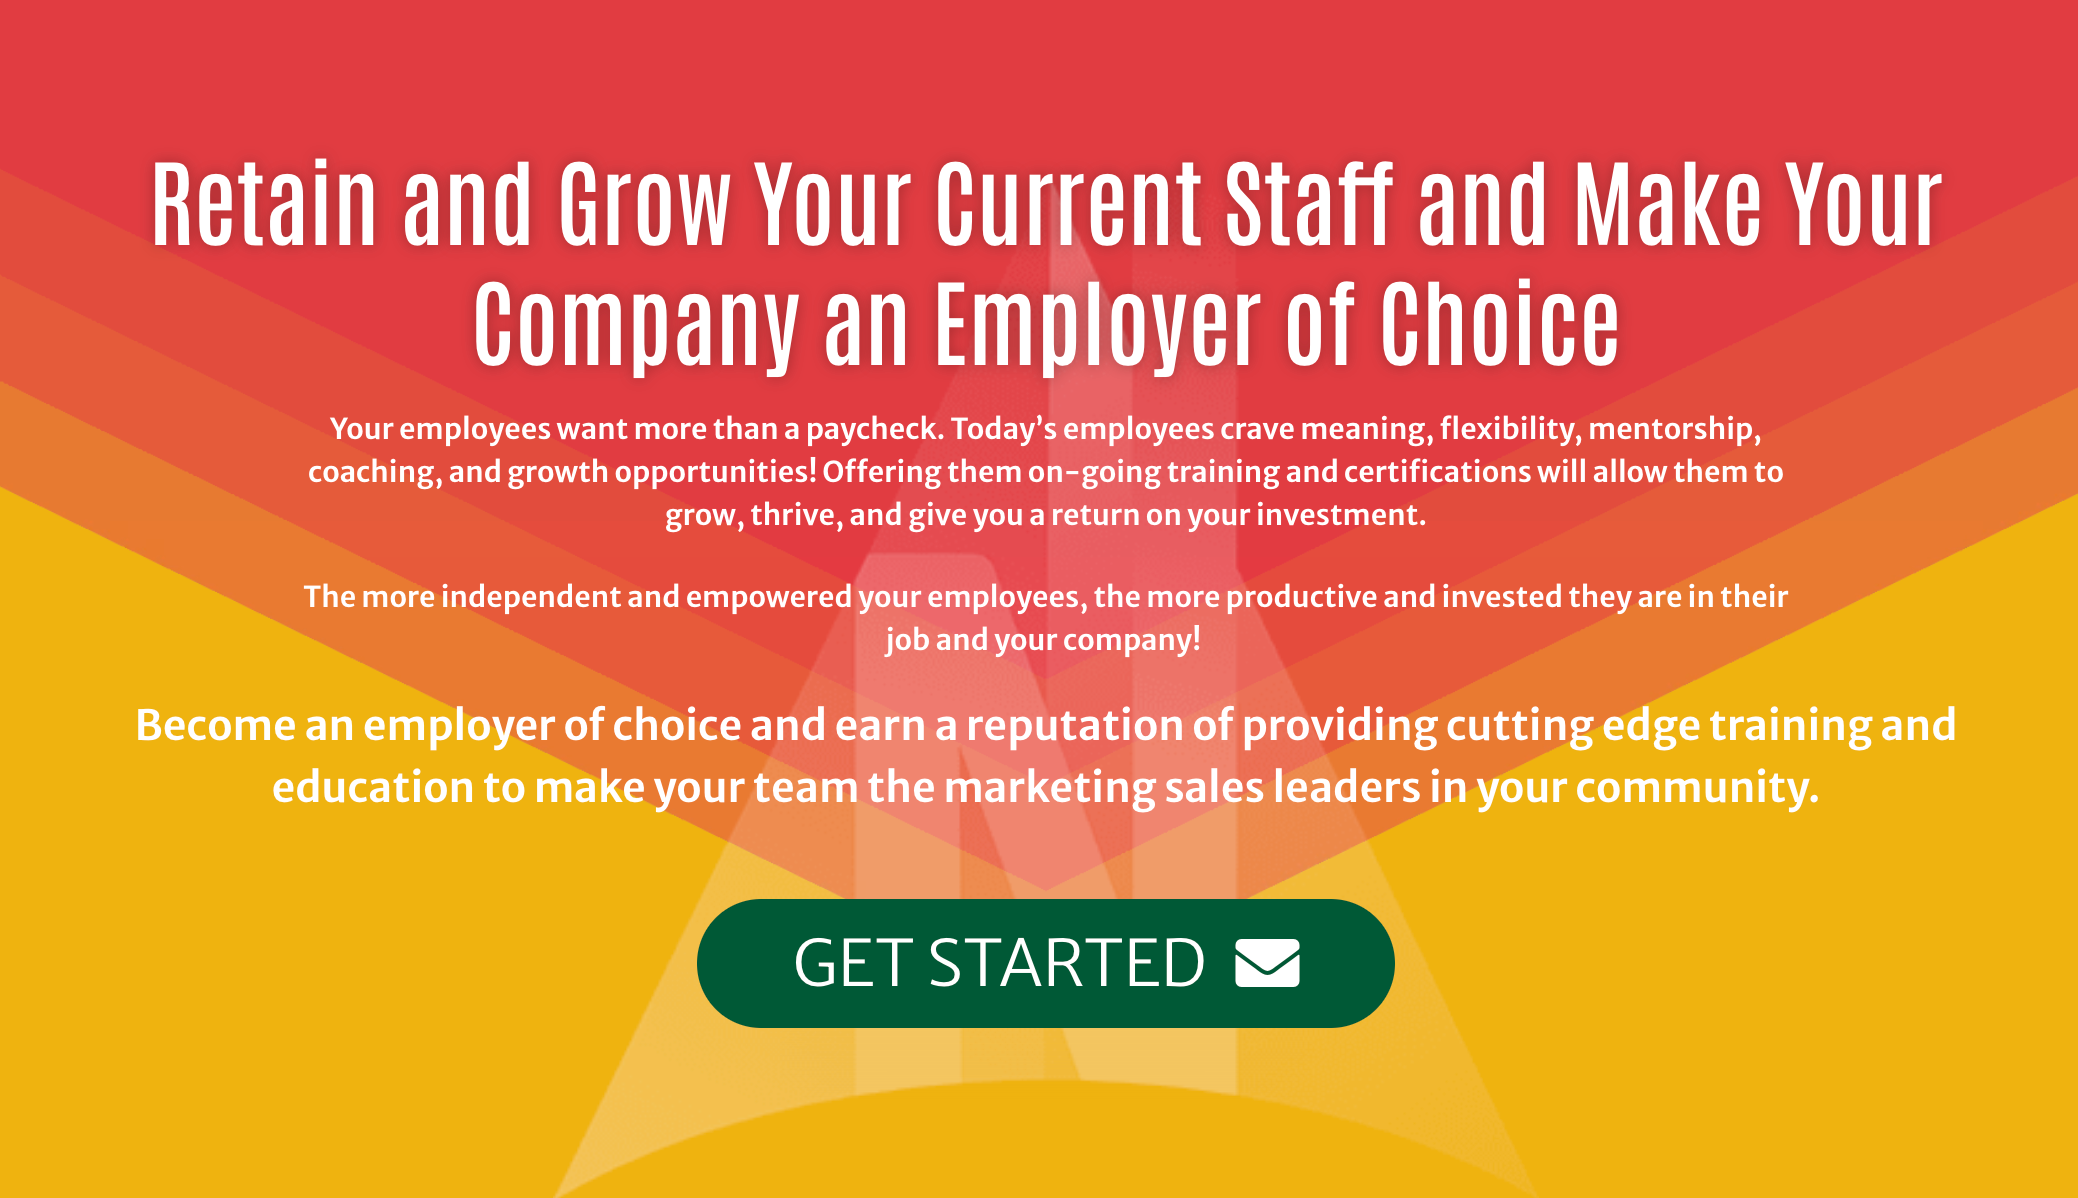 Retain and Grow Your Current Staff and Make Your Company an Employer of Choice